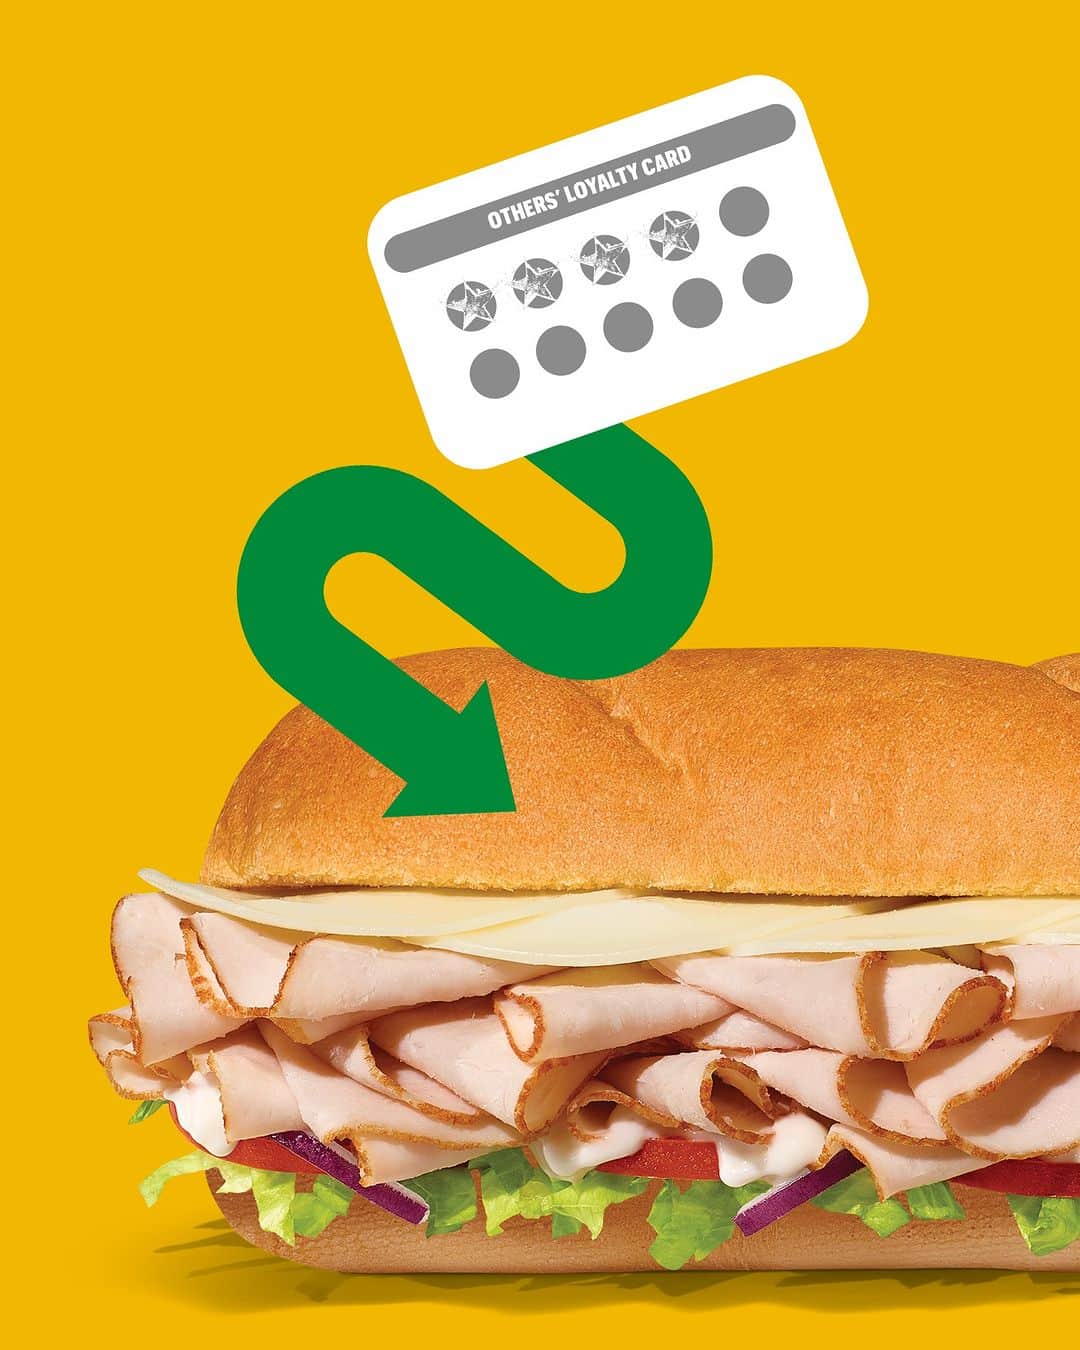 Official Subwayのインスタグラム：「looking to freshen up those 🍔🍟 points? This #NationalSandwichDay, we're taking your points and turning them into Subway® MVP Rewards points when you sign up for our loyalty program 😁  Open only to first 5,000 participants who are legal residents of the 50 U.S./D.C., 18+, and become members of the Subway® MVP Rewards loyalty program between Nov. 1 – 4 (and before the end of the Offer Period), who have accrued loyalty points through an applicable quick service restaurant loyalty program before the start of the Offer, and who take all required steps. Offer begins at 9:00 am ET on 11/3/23 and ends at 9:00 am ET on 11/4/23 or when participation limit is reached, whichever is first to occur. See T&Cs for Rewards, quantities, and calculations. Subject to full Official T&Cs: https://subwaypointmatch.com/rules. Void where prohibited. Sponsor: Subway Franchisee Advertising Fund Trust Ltd.」